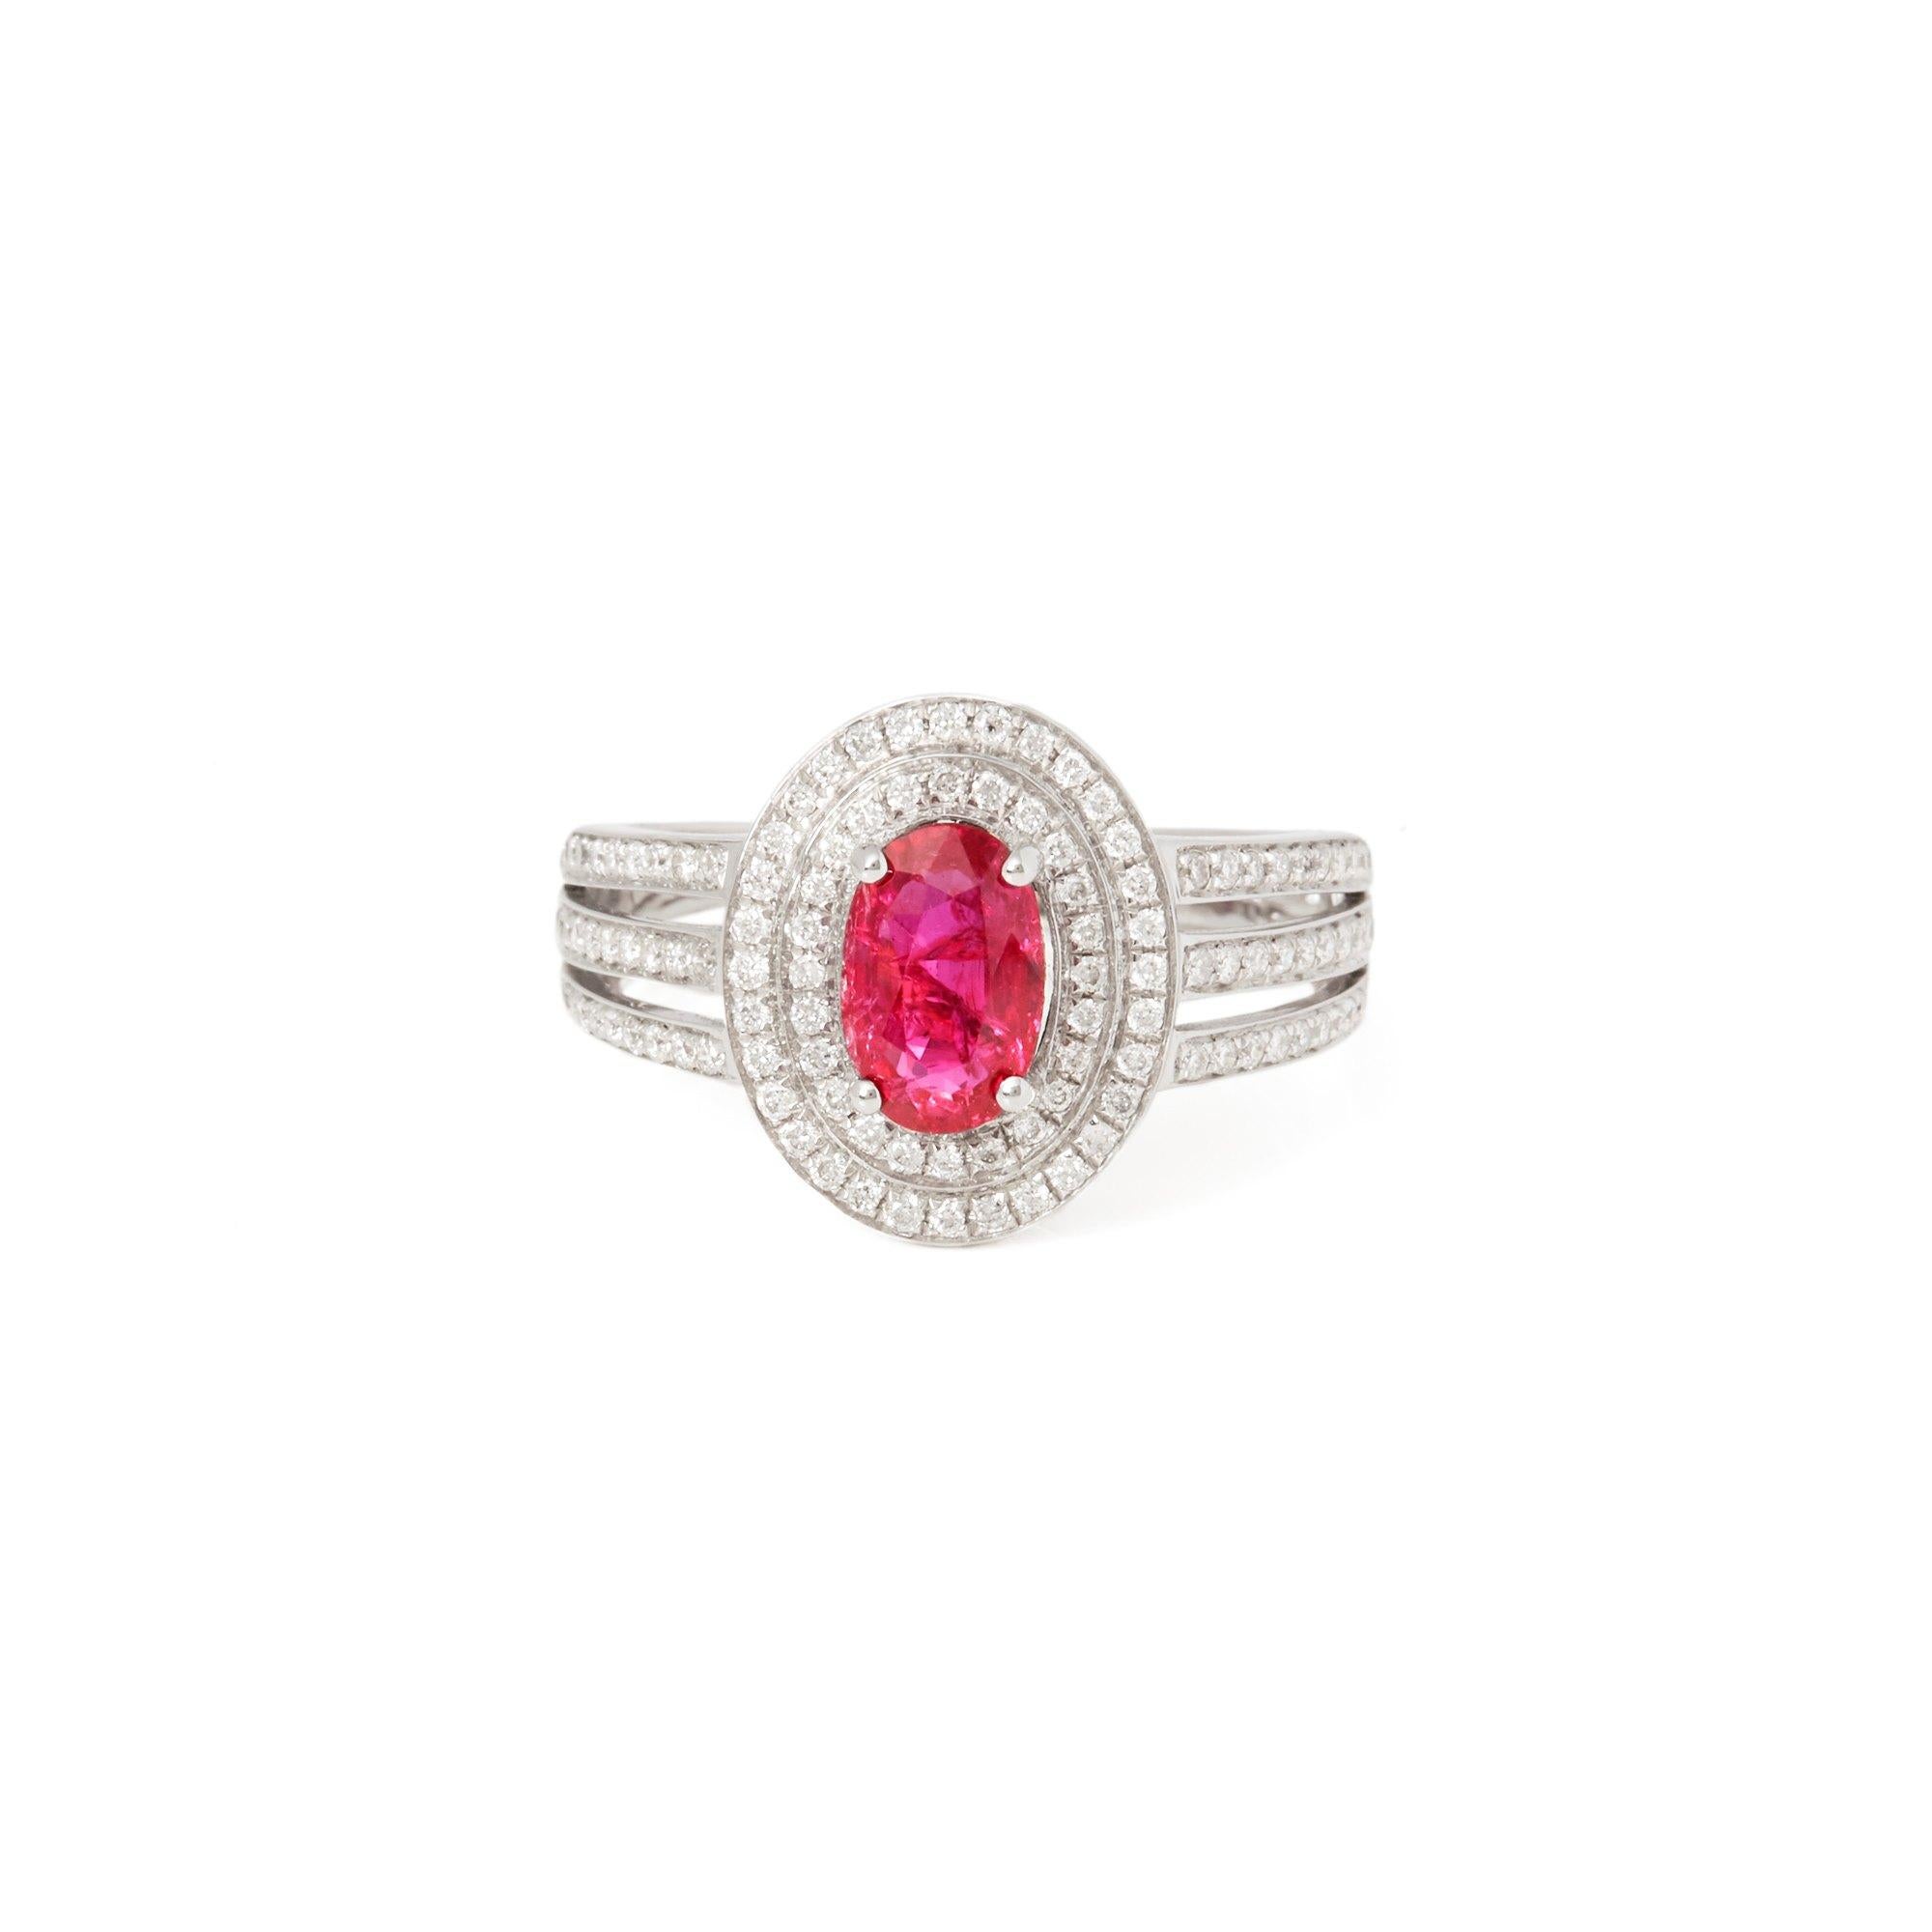 This ring designed by David Jerome is from his private collection and features one natural unheated oval cut Ruby totalling 1.09cts sourced in Burma. Set with round brilliant cut Diamonds totalling 0.48cts mounted in an 18k white gold setting. UK